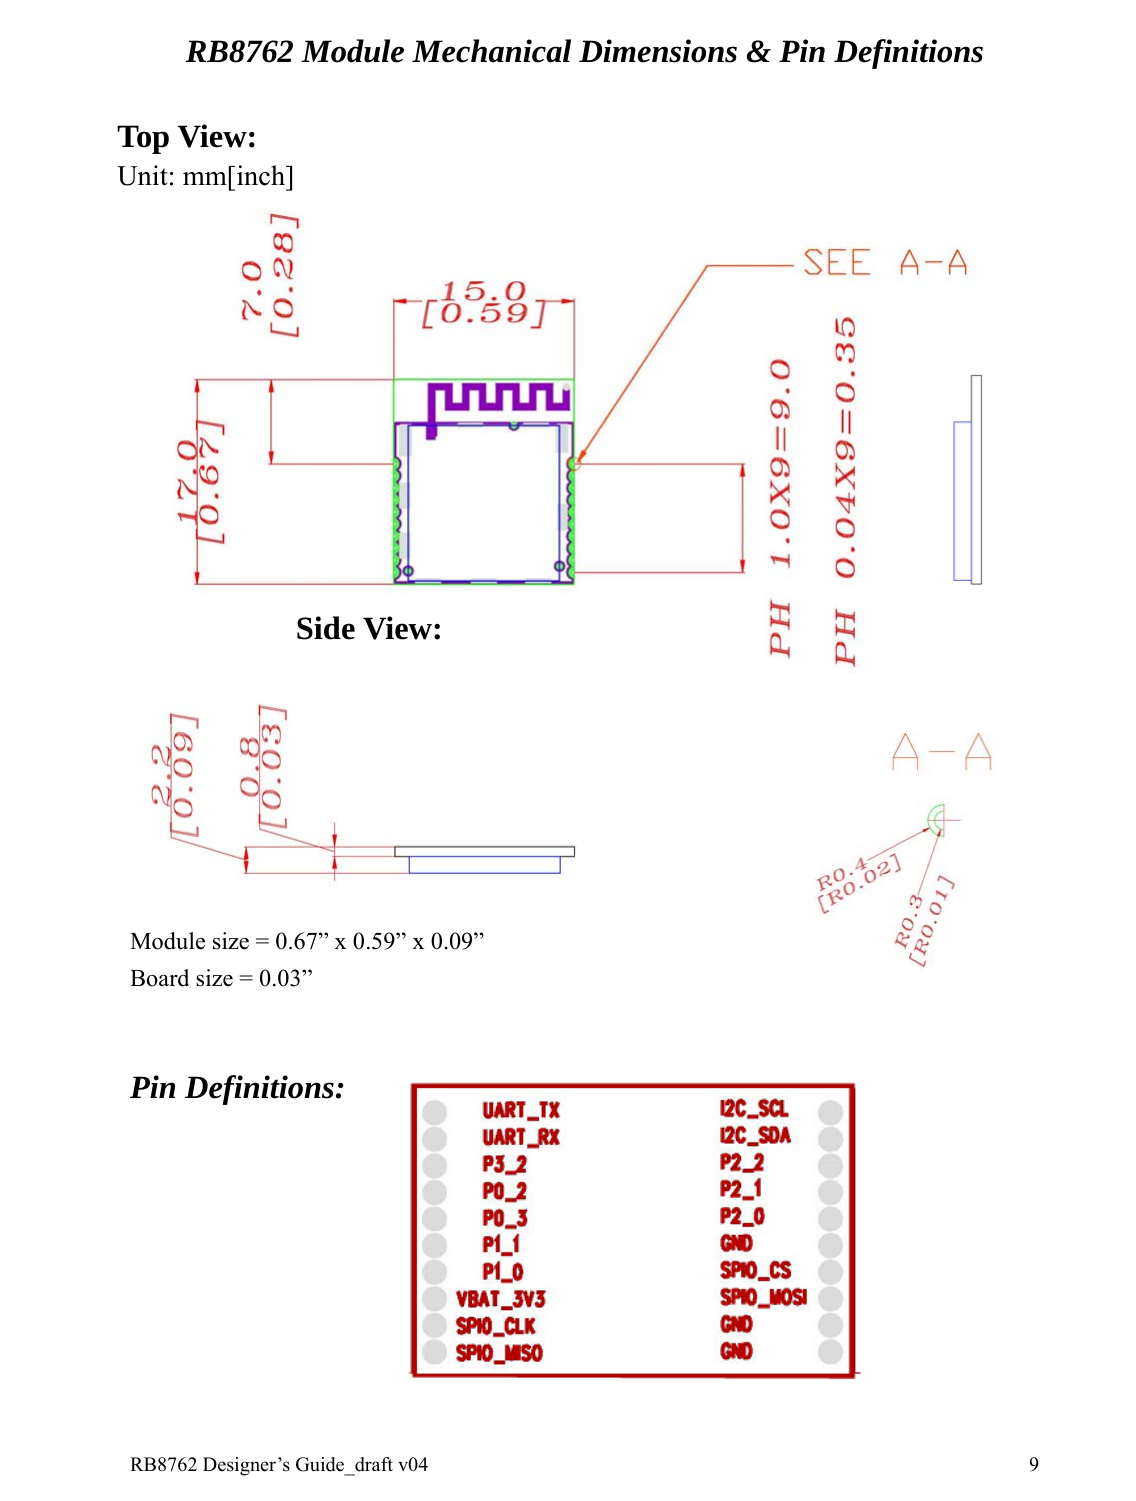 RB8762 Designer’s Guide_draft v04    9RB8762 Module Mechanical Dimensions &amp; Pin Definitions                      Module size = 0.67” x 0.59” x 0.09” Board size = 0.03”   Pin Definitions:       Top View: Side View: Unit: mm[inch] 